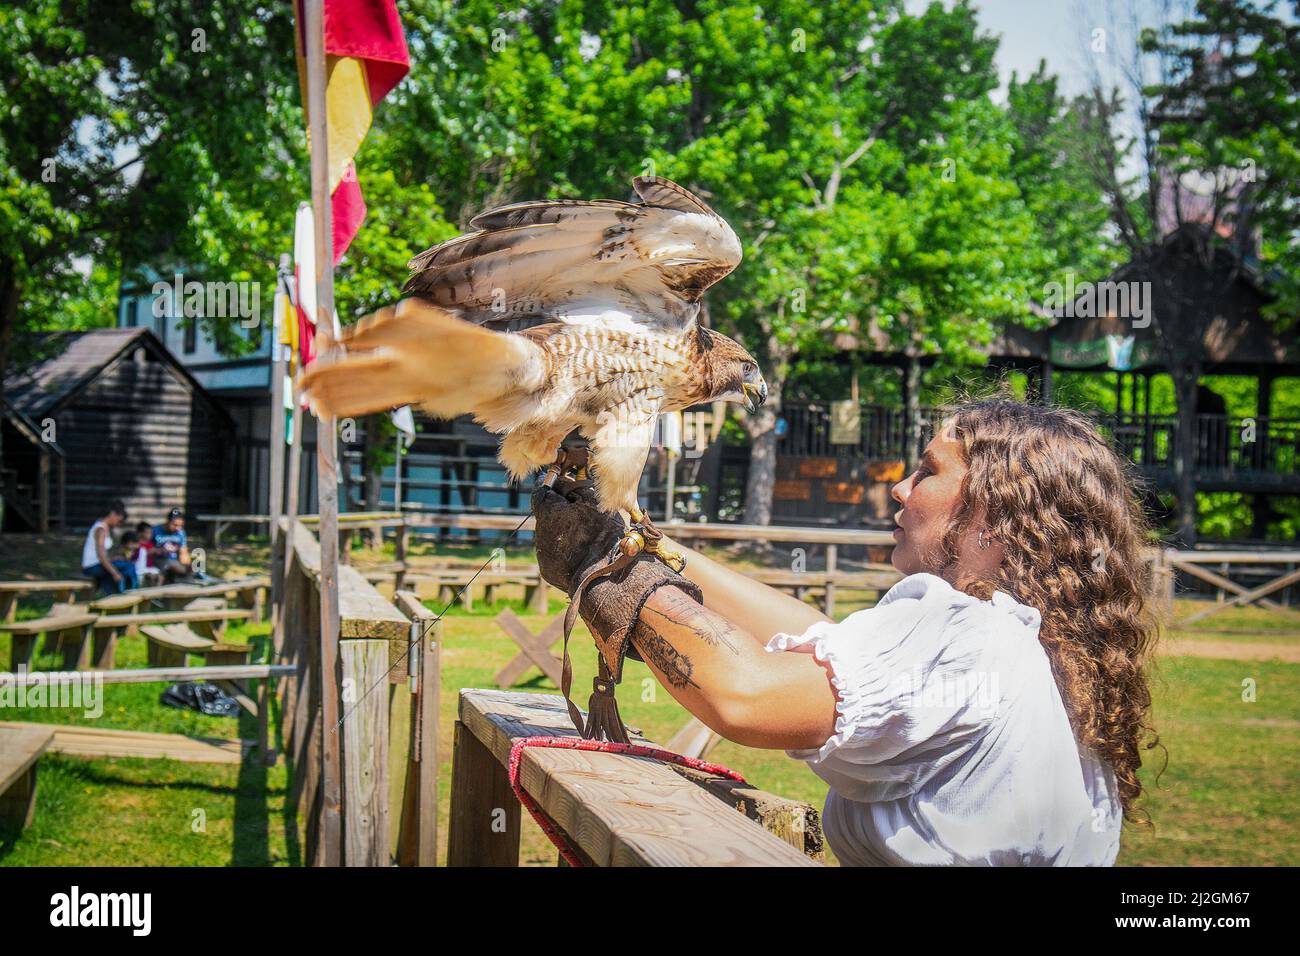 05-13-2018 Muskogee USA - Falconry - Pretty girl works with trained hawk in outdoor areana. Stock Photo